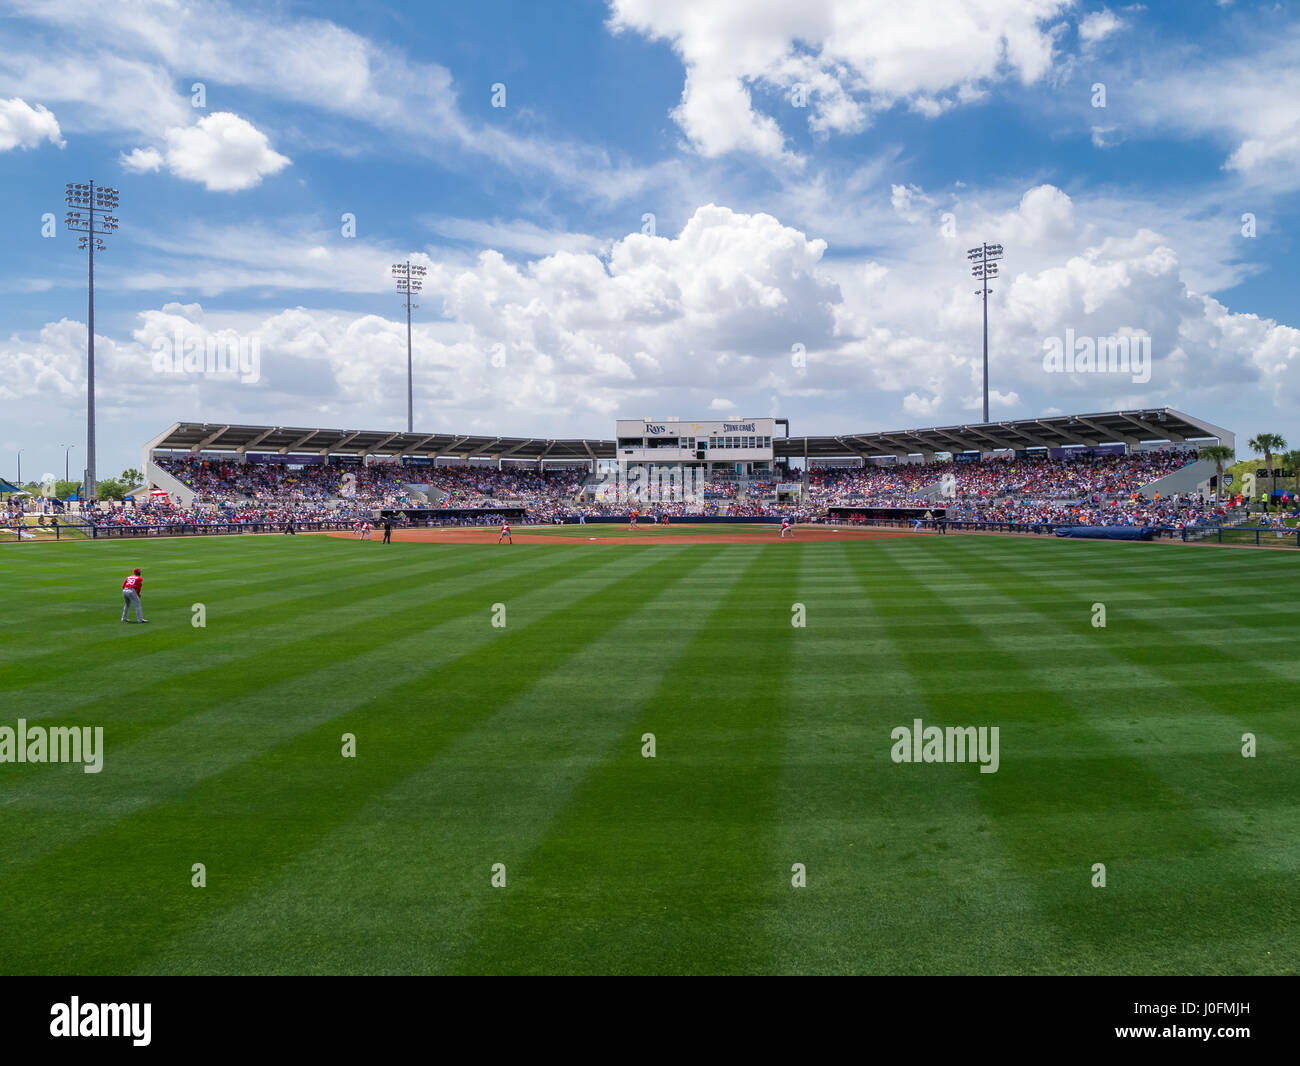 Charlotte Sports Park on El Jobean Road (SR 776) in Port Charlotte Florida is the Spring Training home of the Tampa Bay Rays Stock Photo